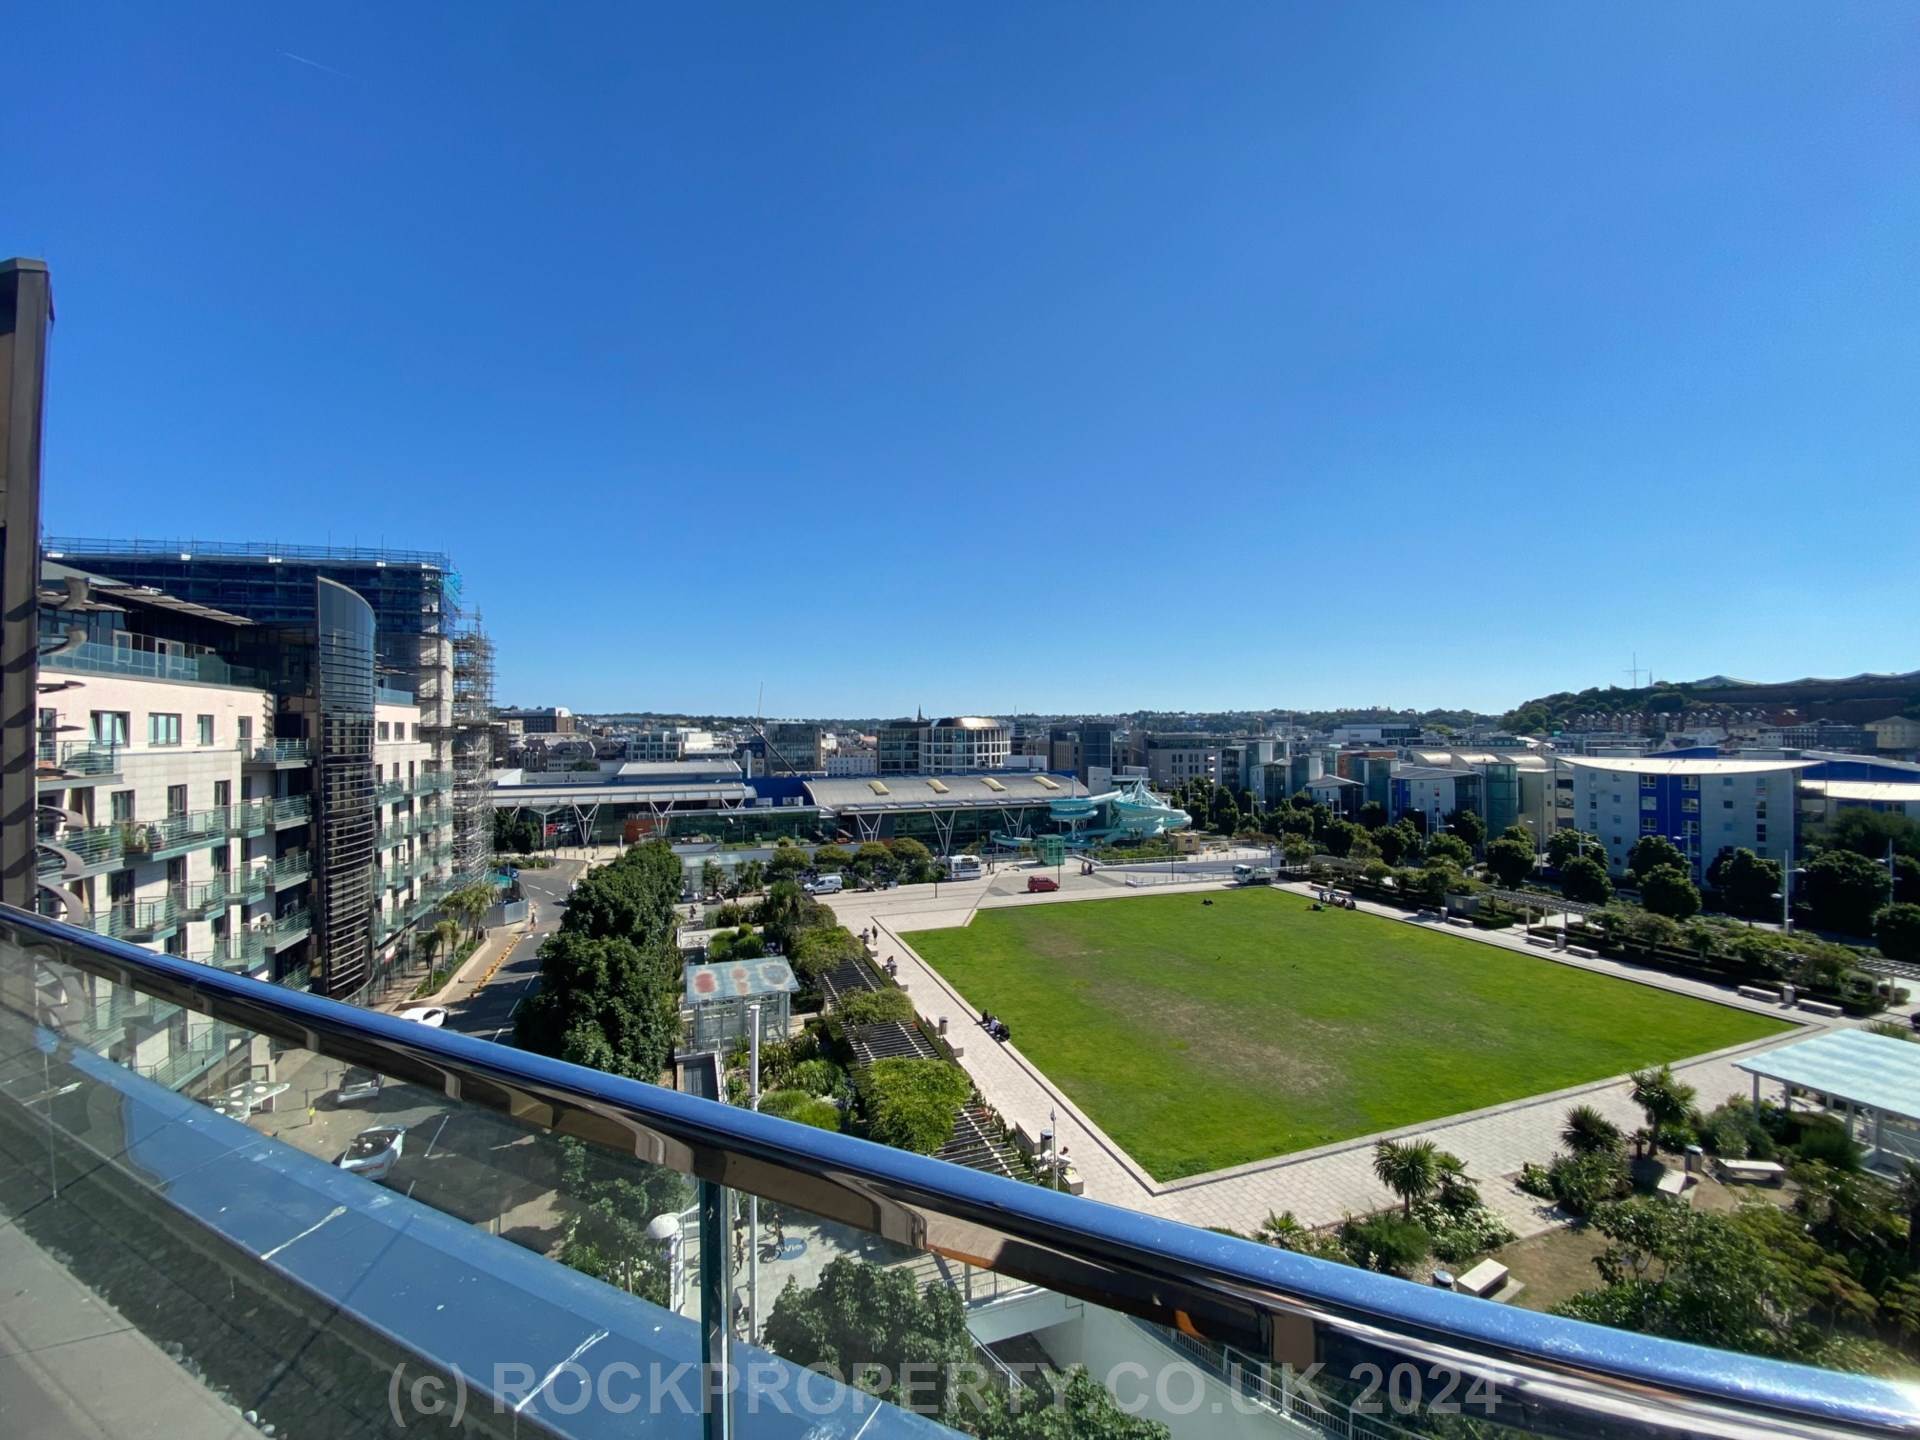 STUNNING 1 BED PENTHOUSE APARTMENT, Le Capelain House, St Helier, Image 1